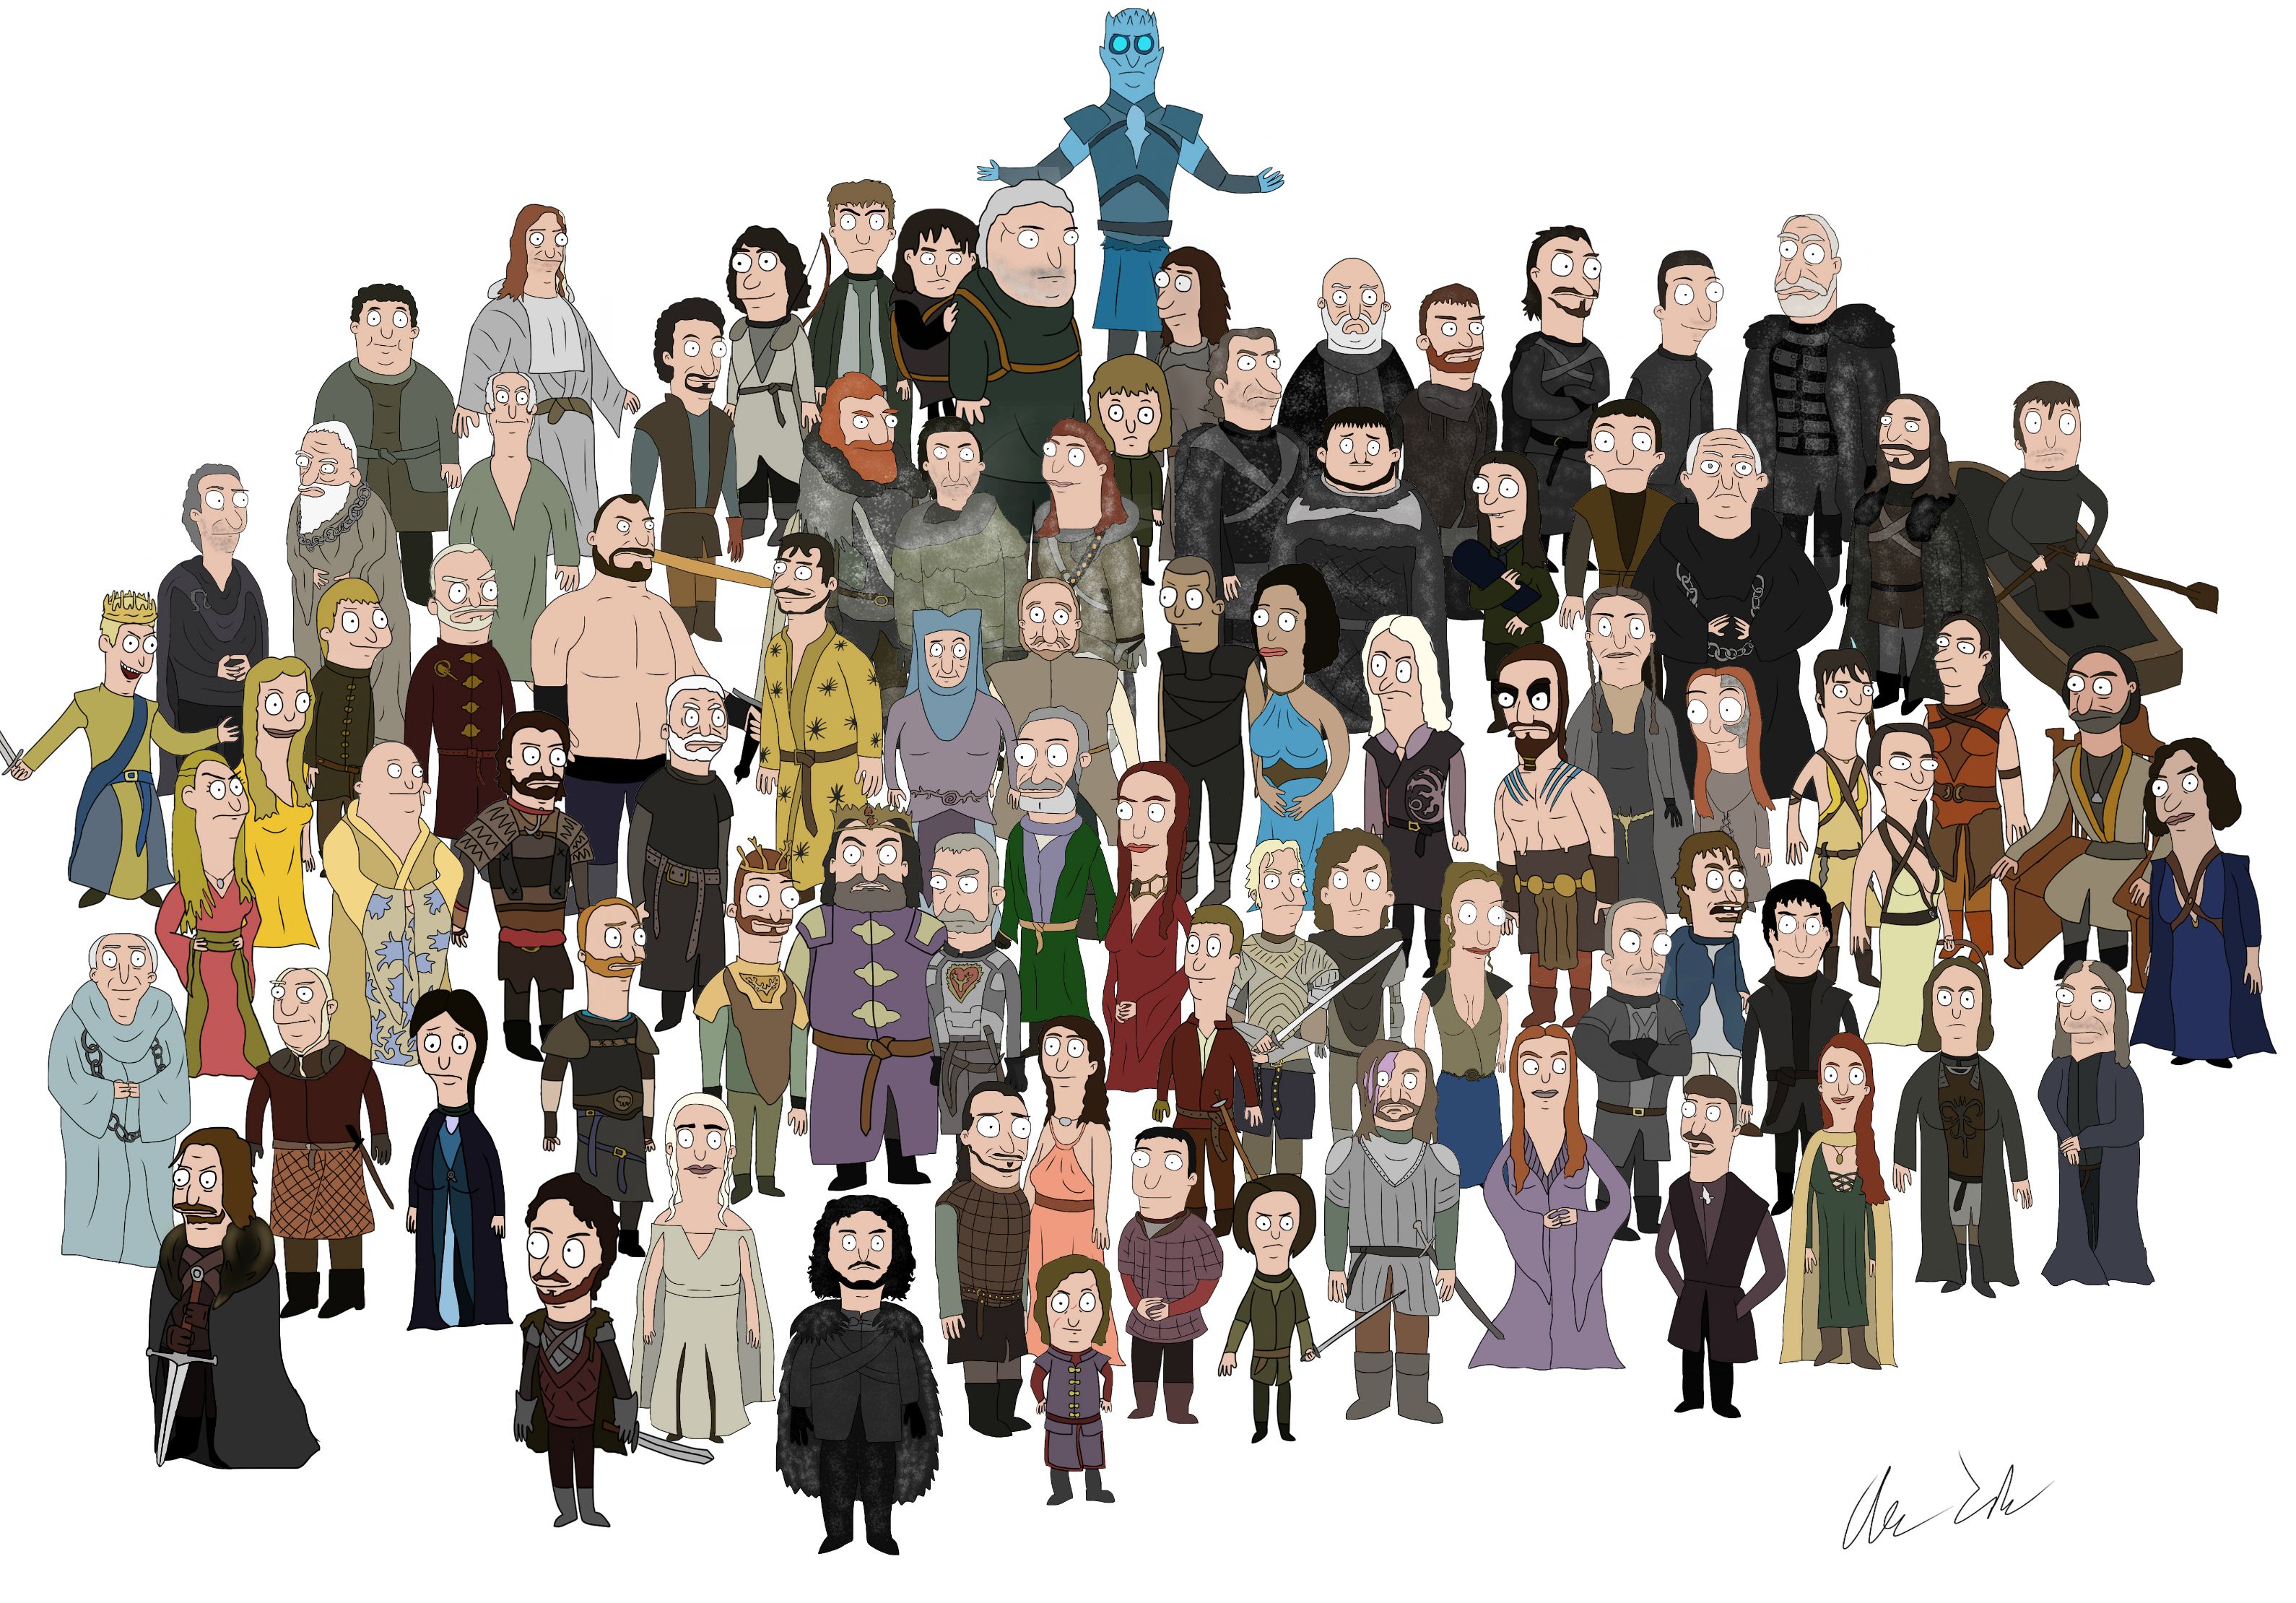 Game of Thrones - Bob's Burgers Style by CarlosDanger101